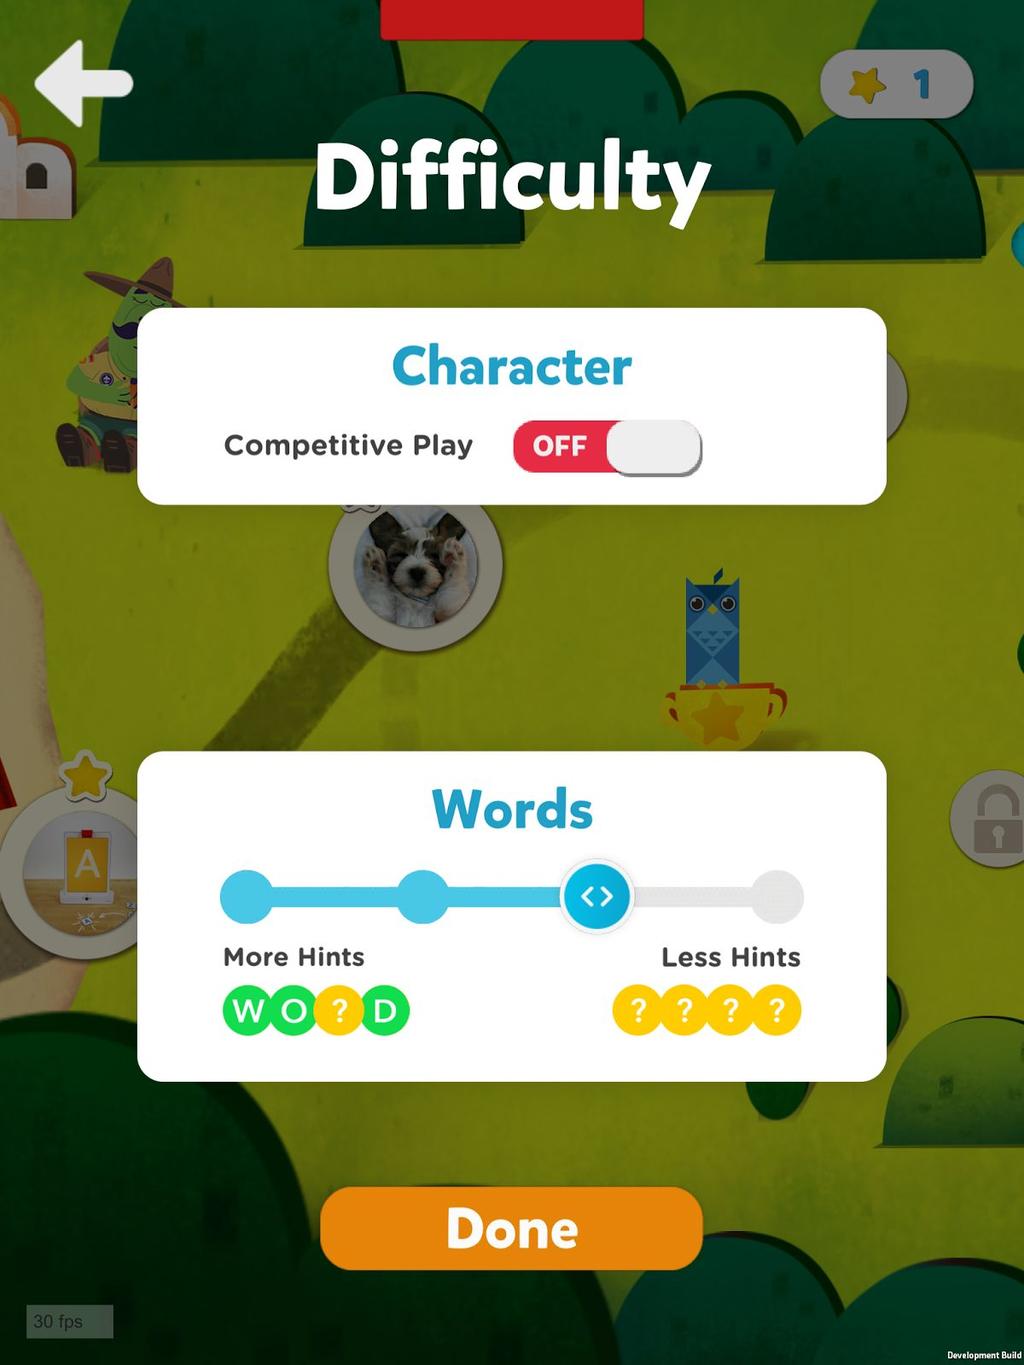 For Word difficulty, the number of hints can be set at four different levels.